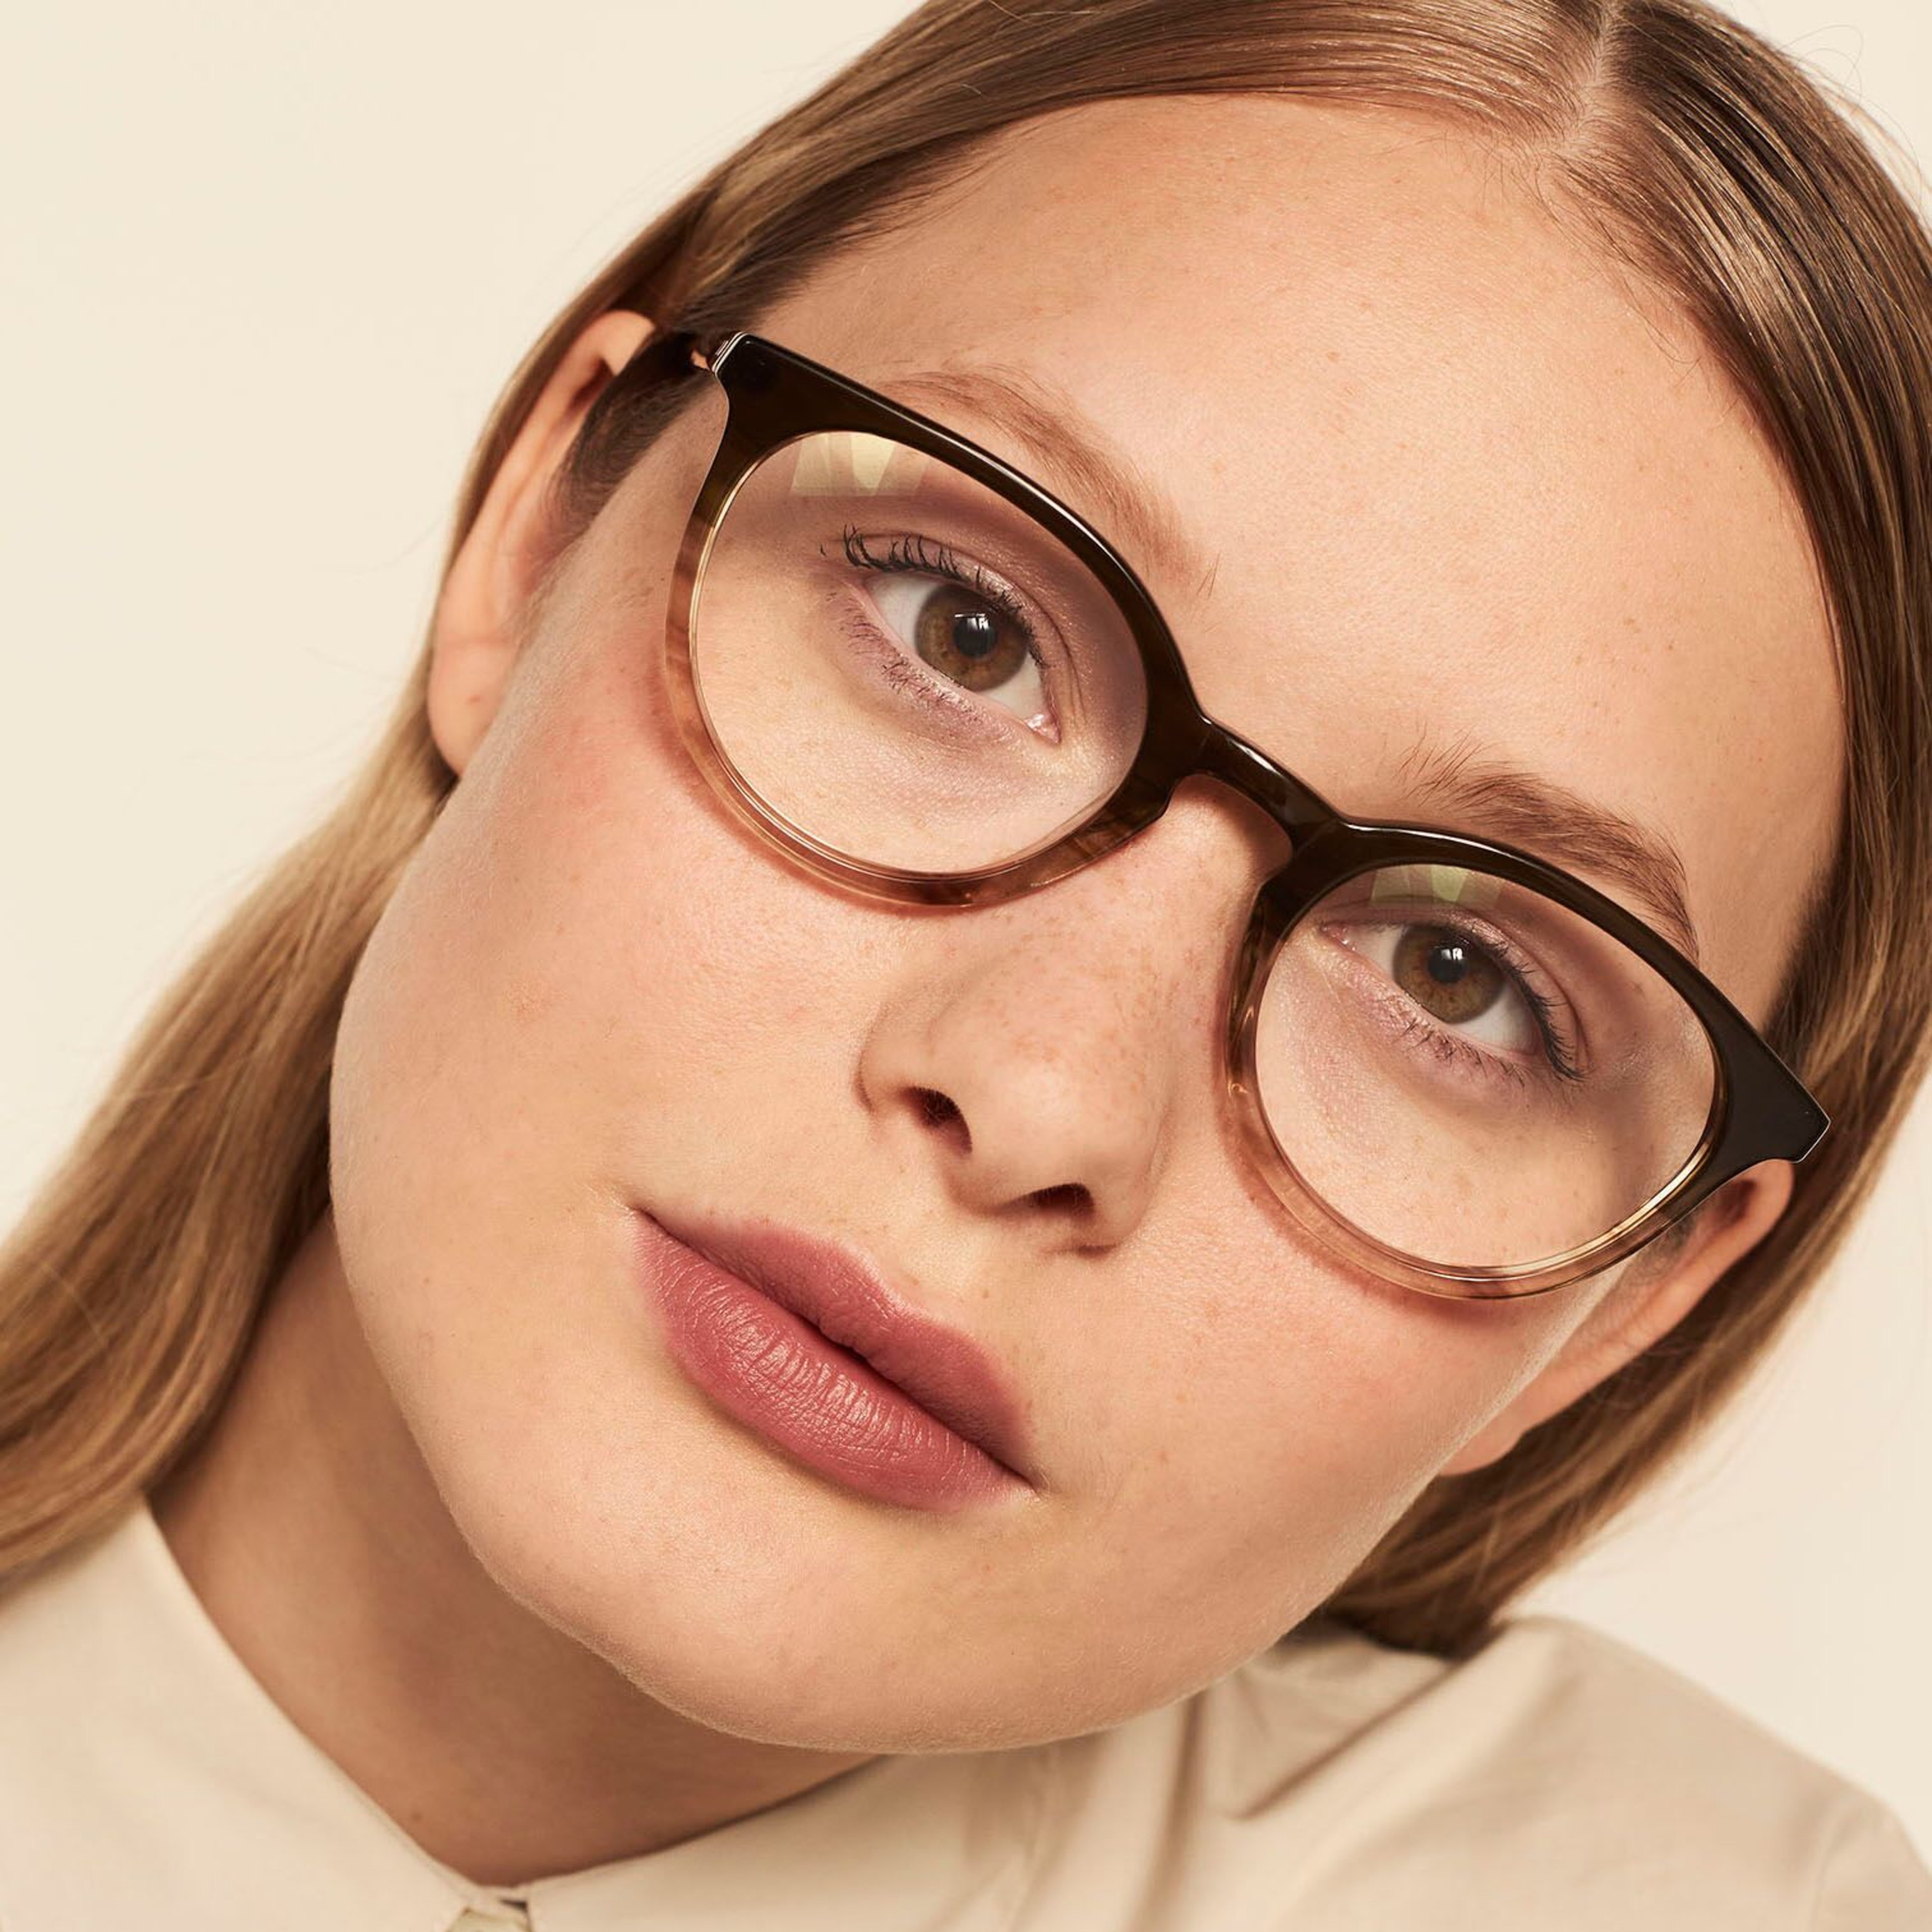 Ace & Tate Glasses | round acetate in Brown, Green